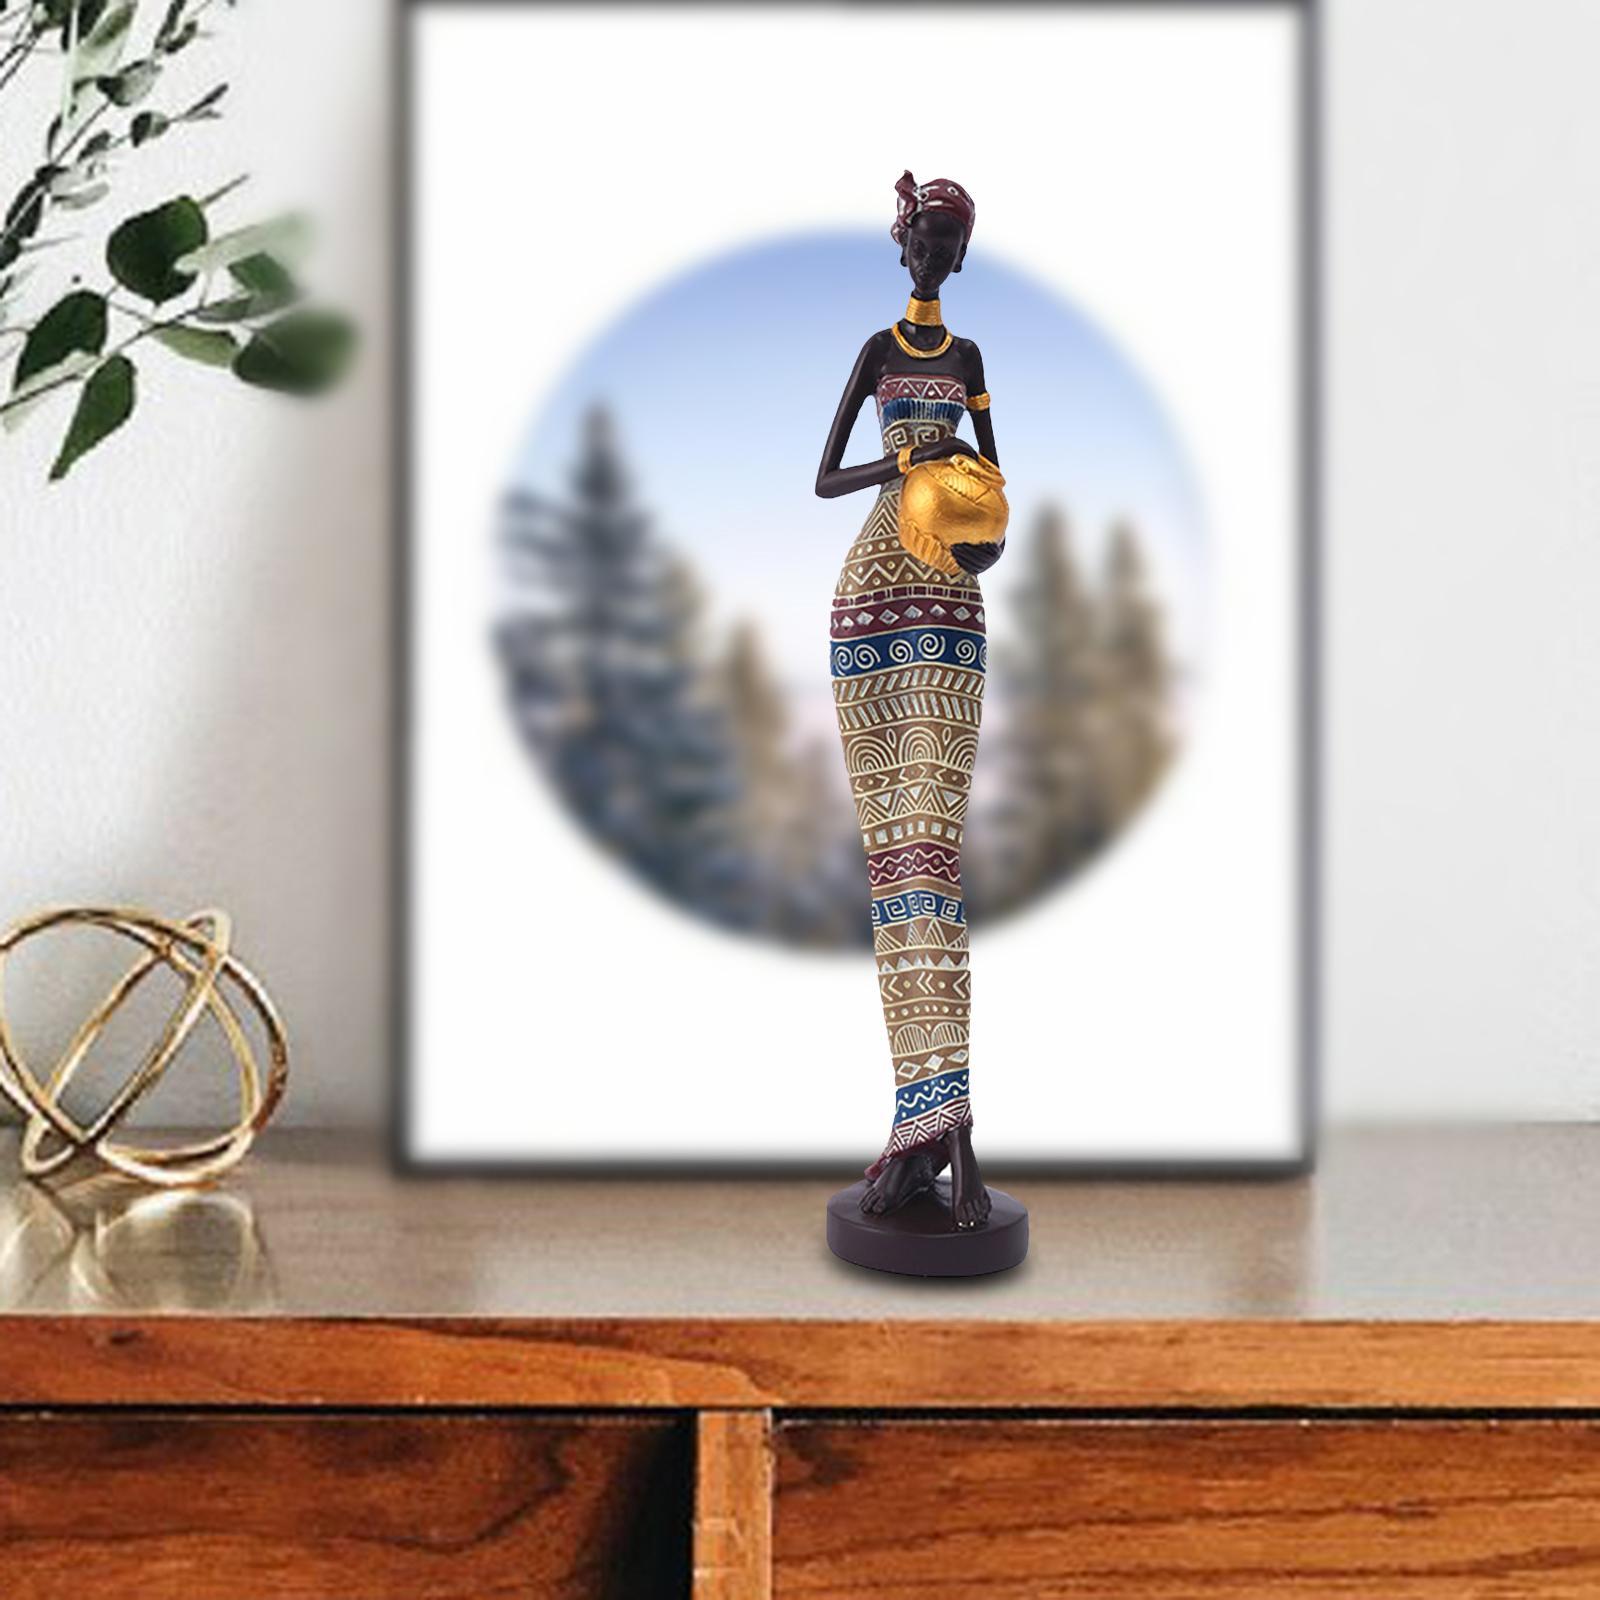 African Figurine Women Figure Statue Artwork Home Decor Novelty Tribal Lady Sculpture Statues and Sculptures for Bedroom Tabletop TV Cabinet